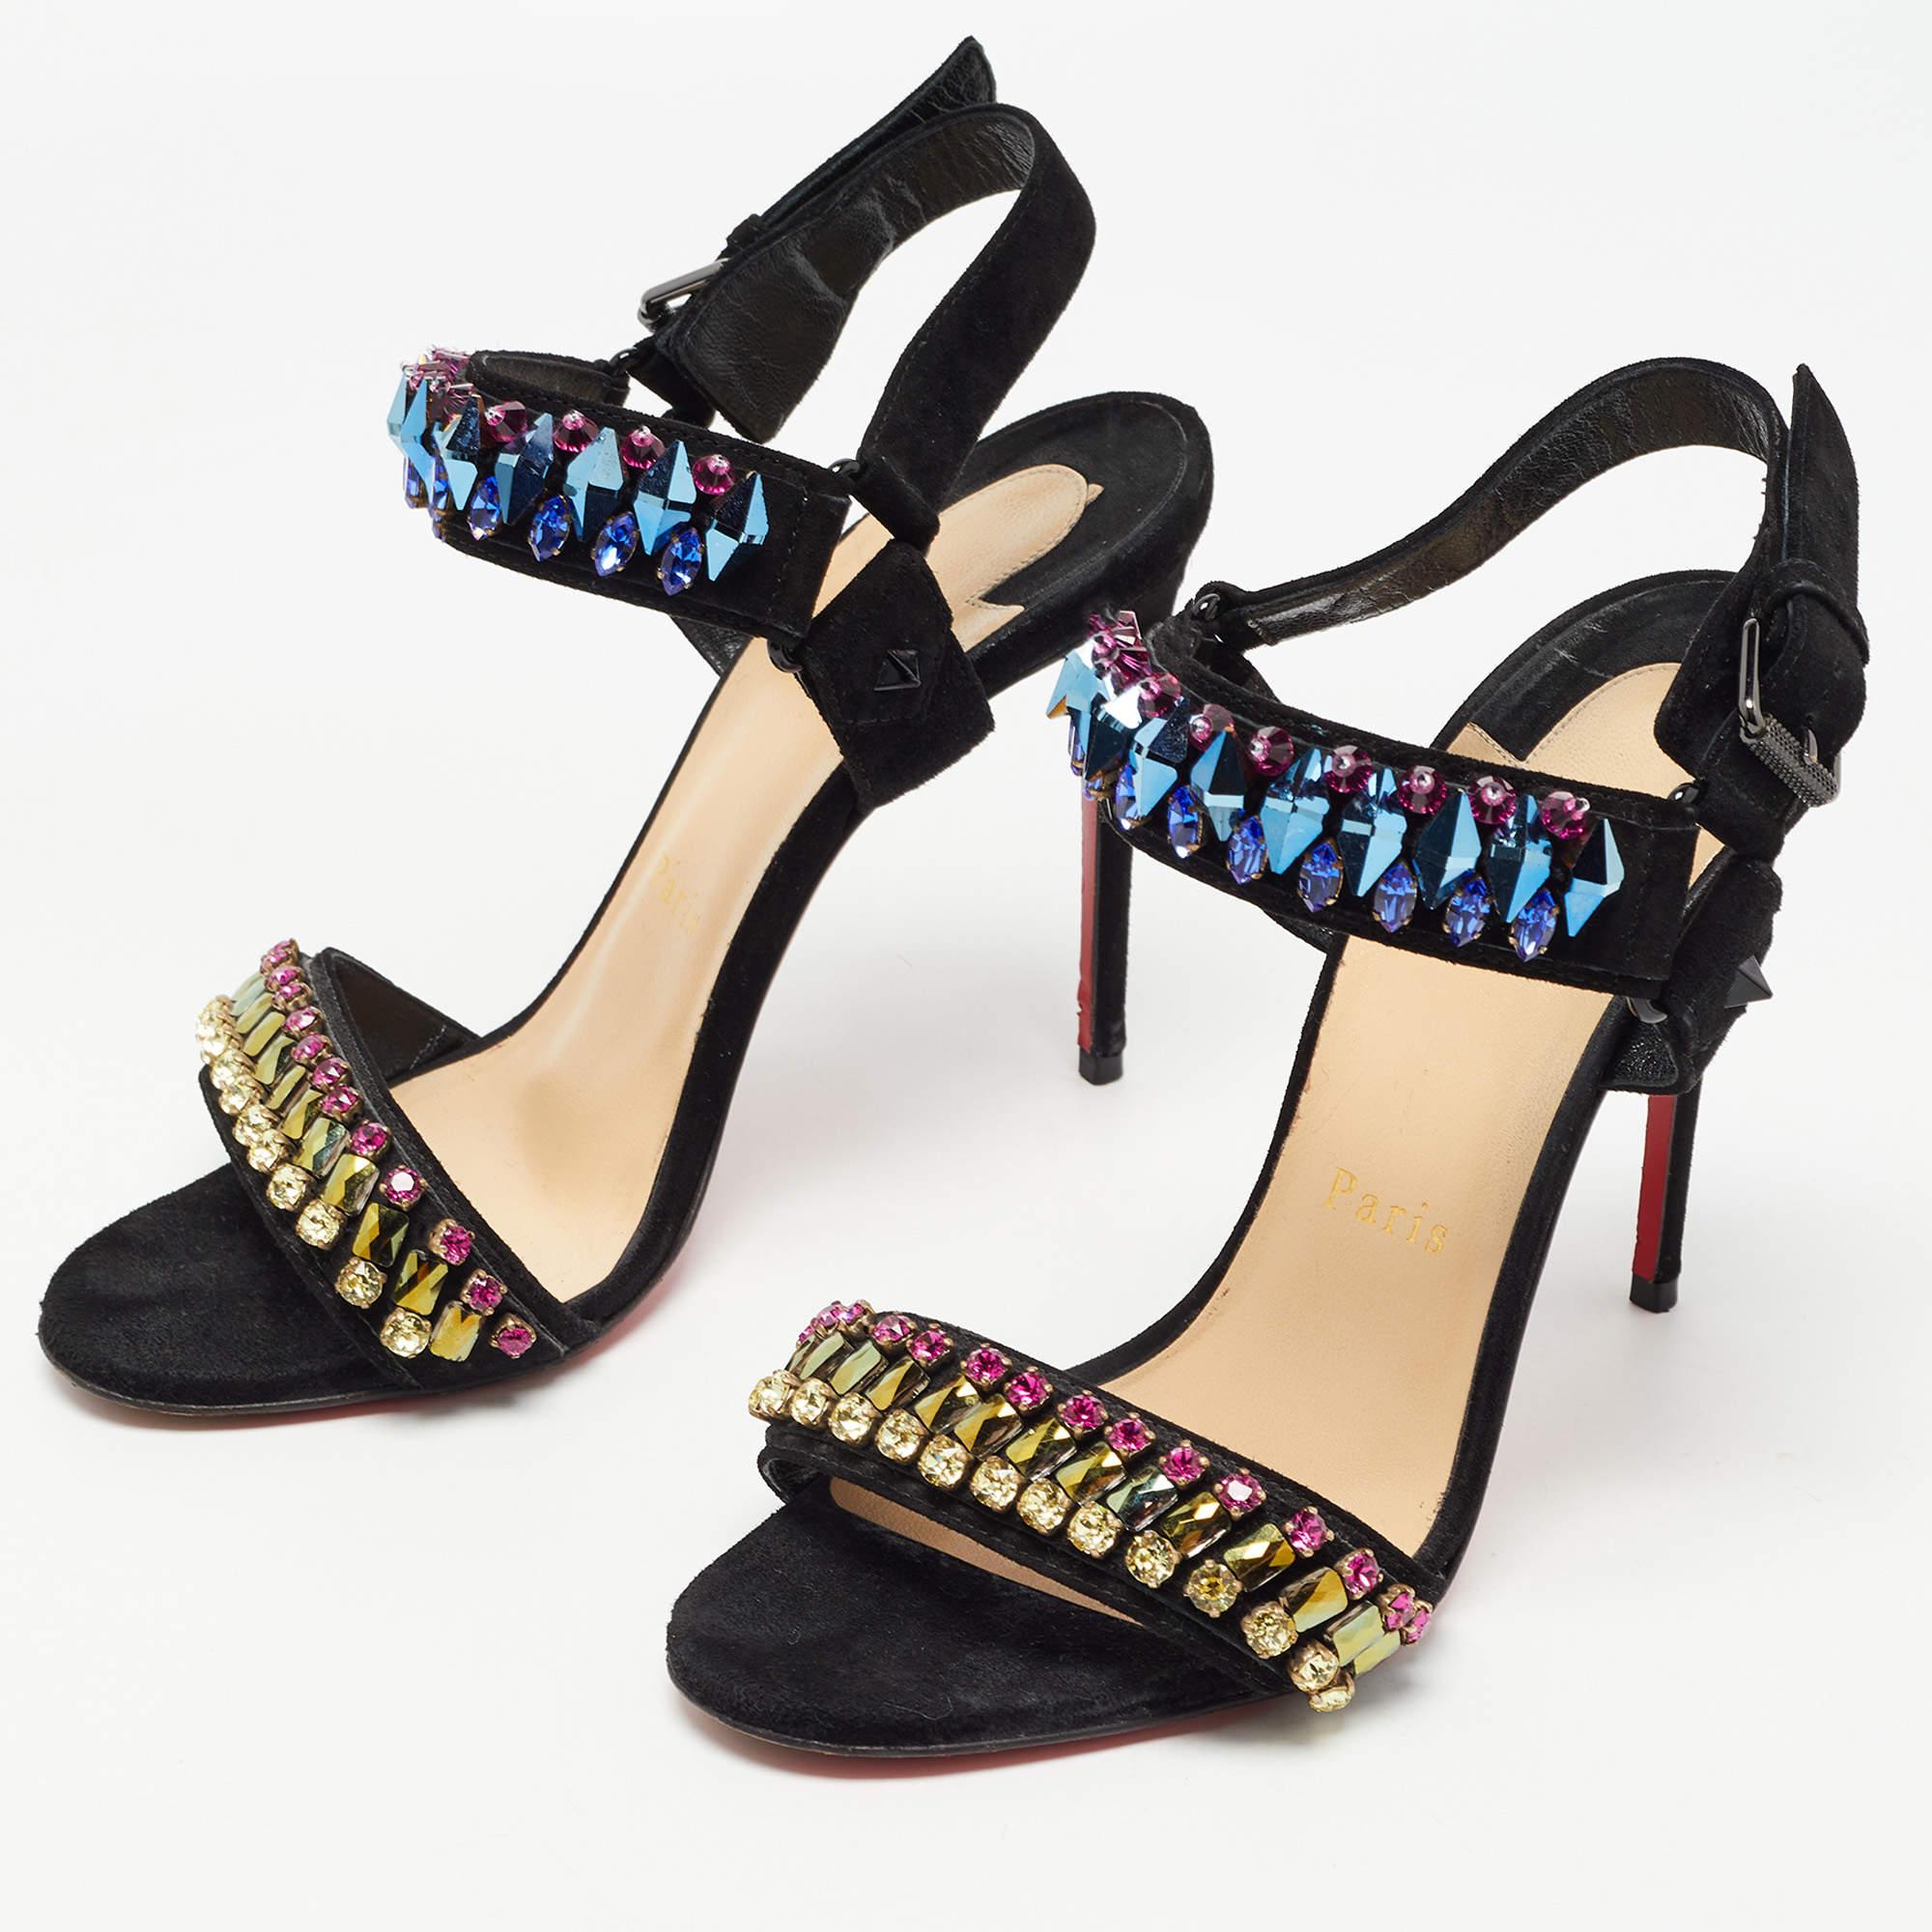 Christian Louboutin Black Suede Sova Broda Sandals Size 36.5 For Sale 1